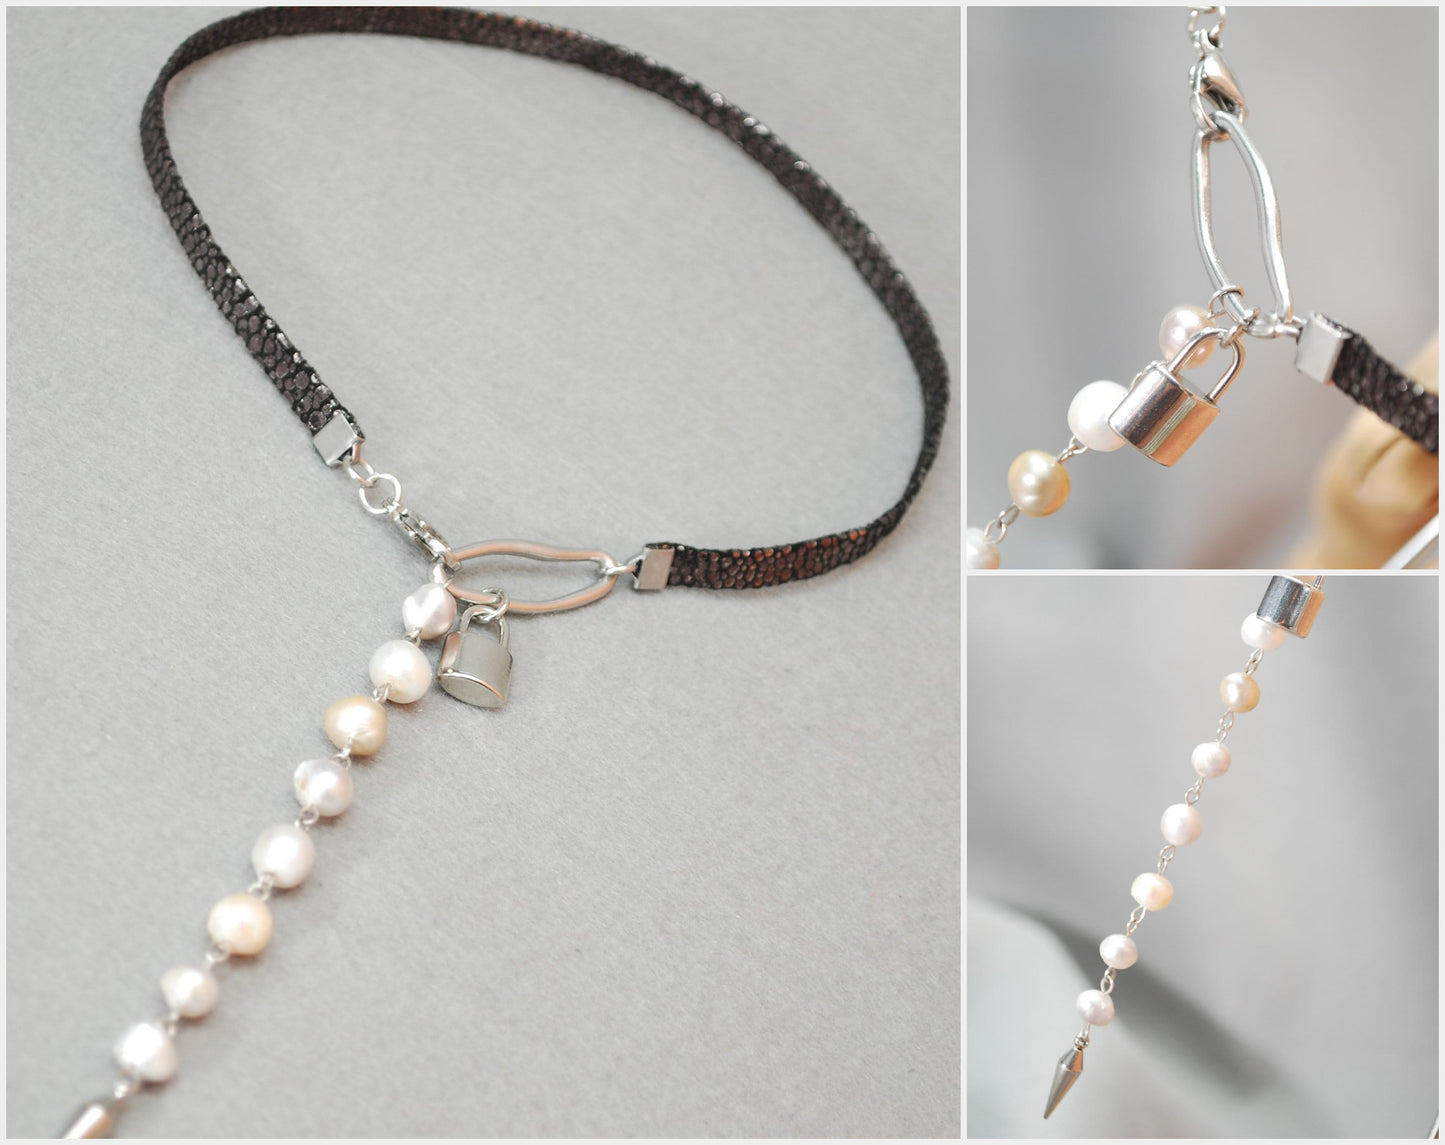 Ethnic-Inspired Choker y Y-Necklace: Handcrafted Boho-Chic Leather Jewelry Adorned with Freshwater Pearl Beads by Estibela Design